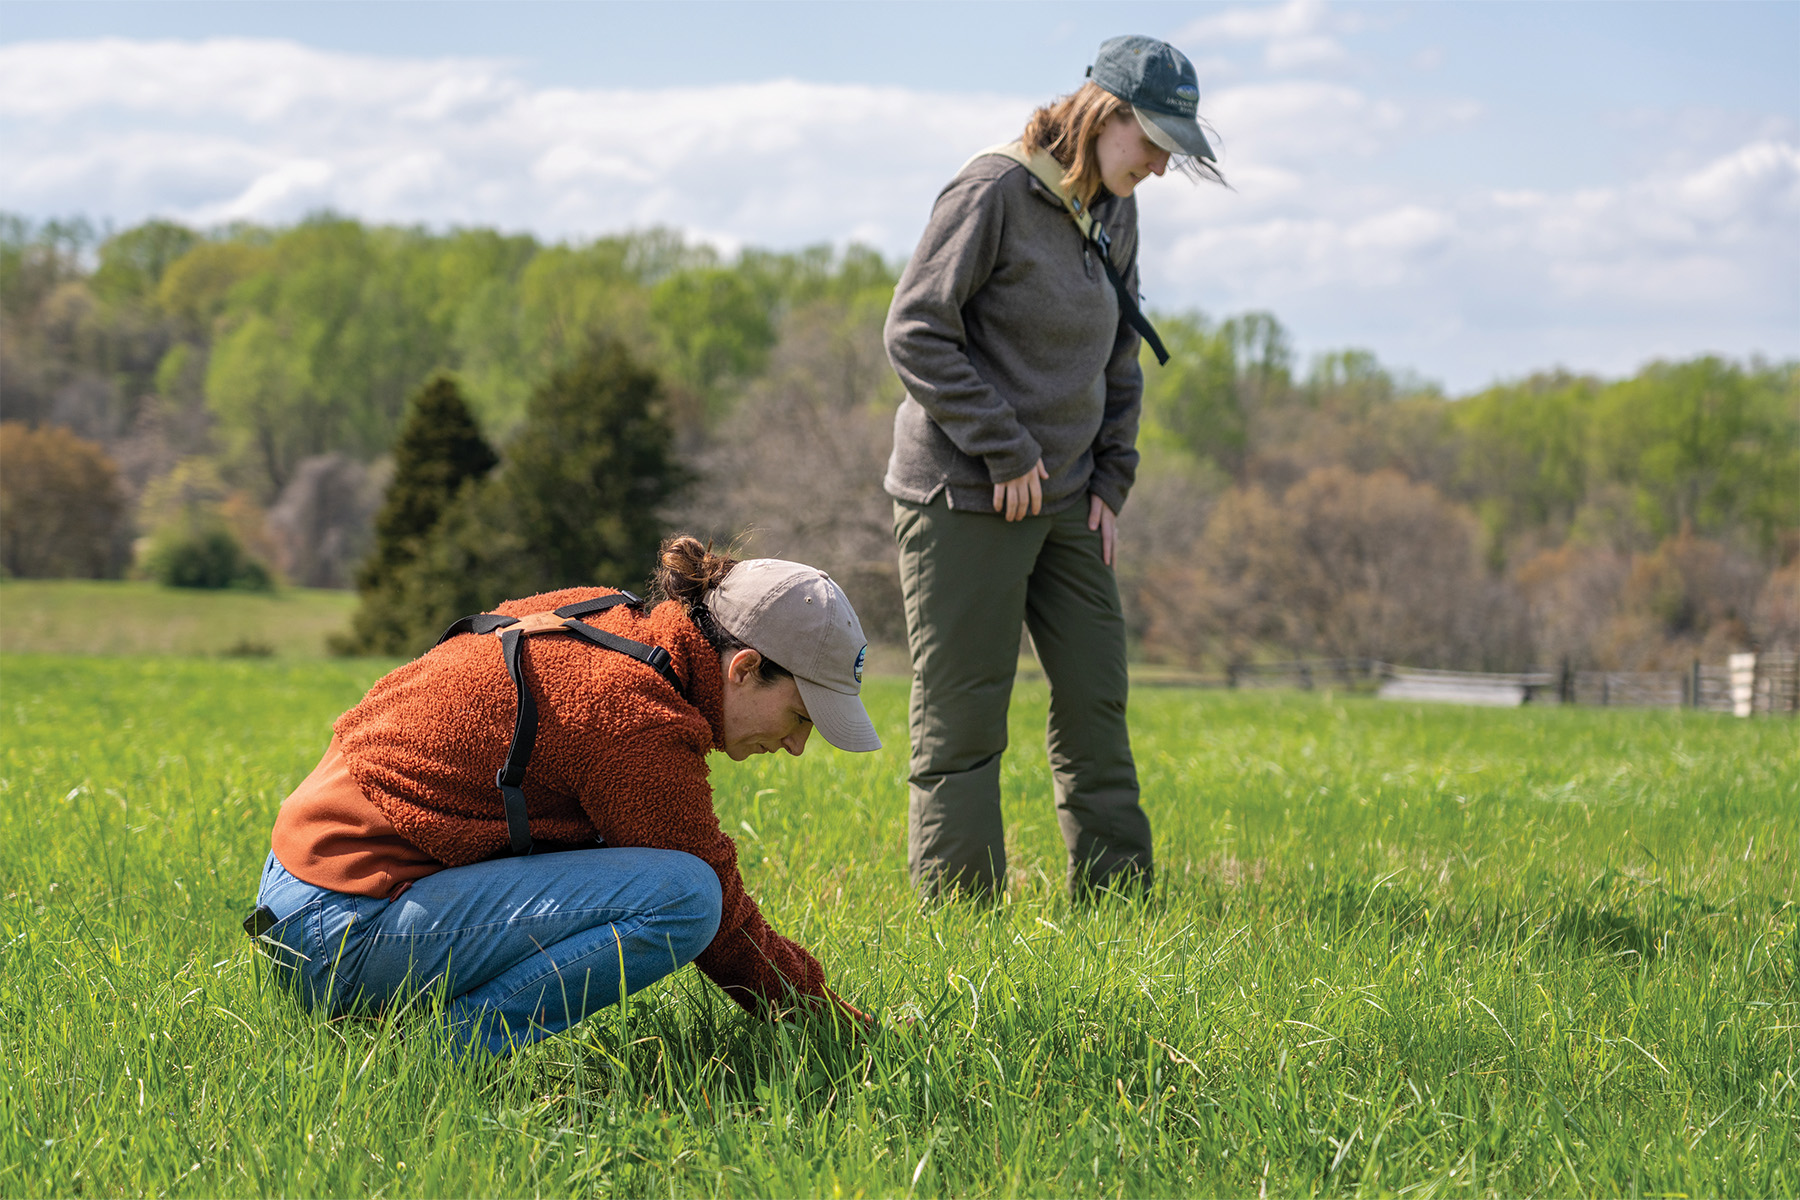 Virginia Working Landscapes’ Amy Johnson and Erin Shibley monitor hayfields where meadowlarks are likely to nest. Tracking nesting birds such as meadowlarks can help determine if essential relationships between native wildlife populations and farmlands are intact—and inform more sustainable land management techniques. PHOTO Hugh Kenny for the Piedmont Environmental Council